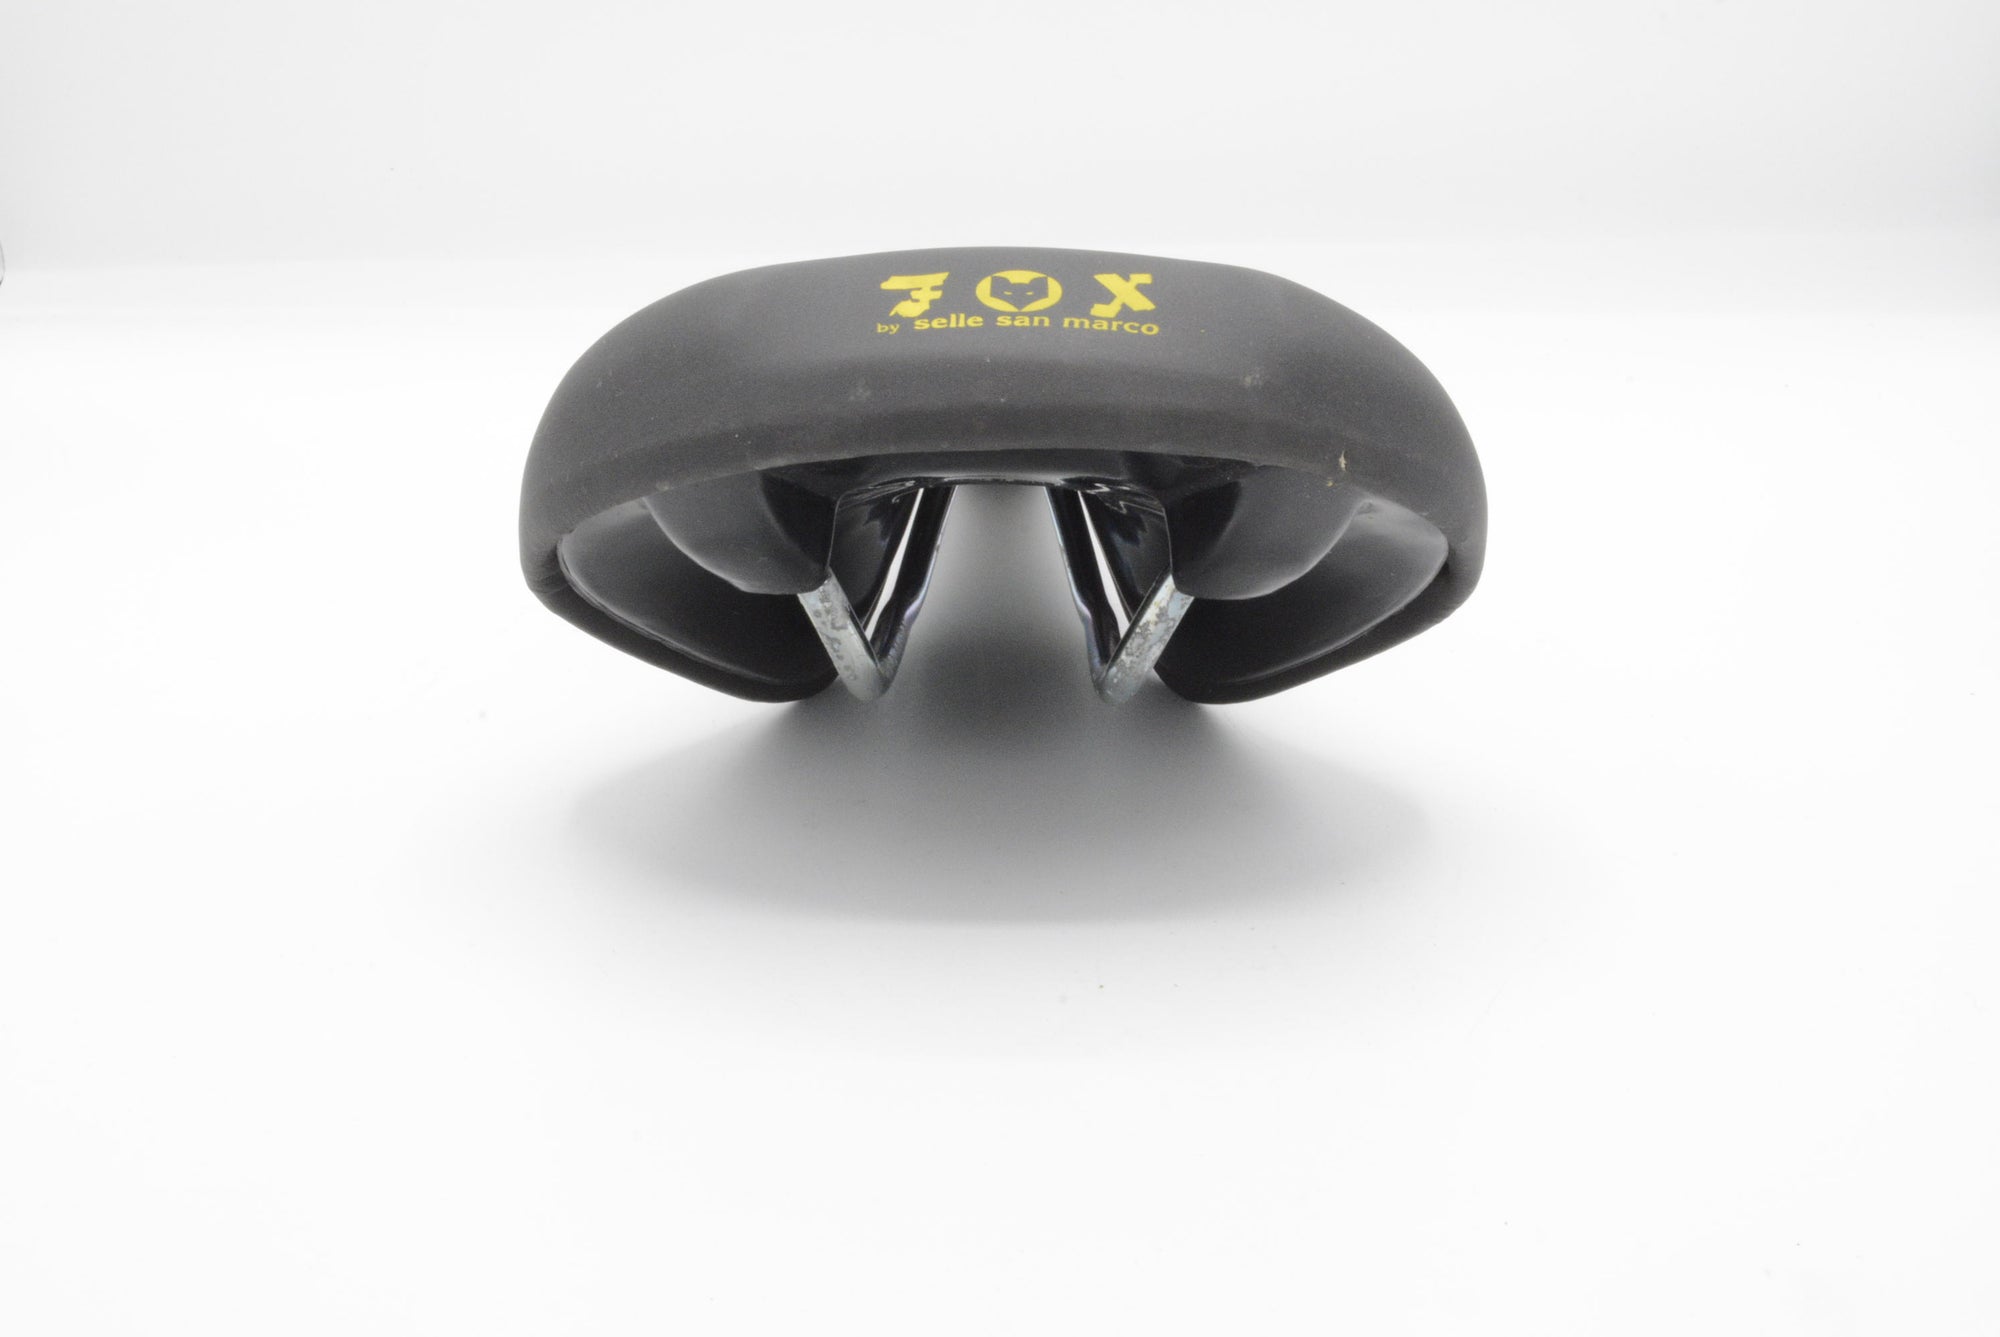 FOX Sattel by Selle San Marco NOS Saddle FOX Racing